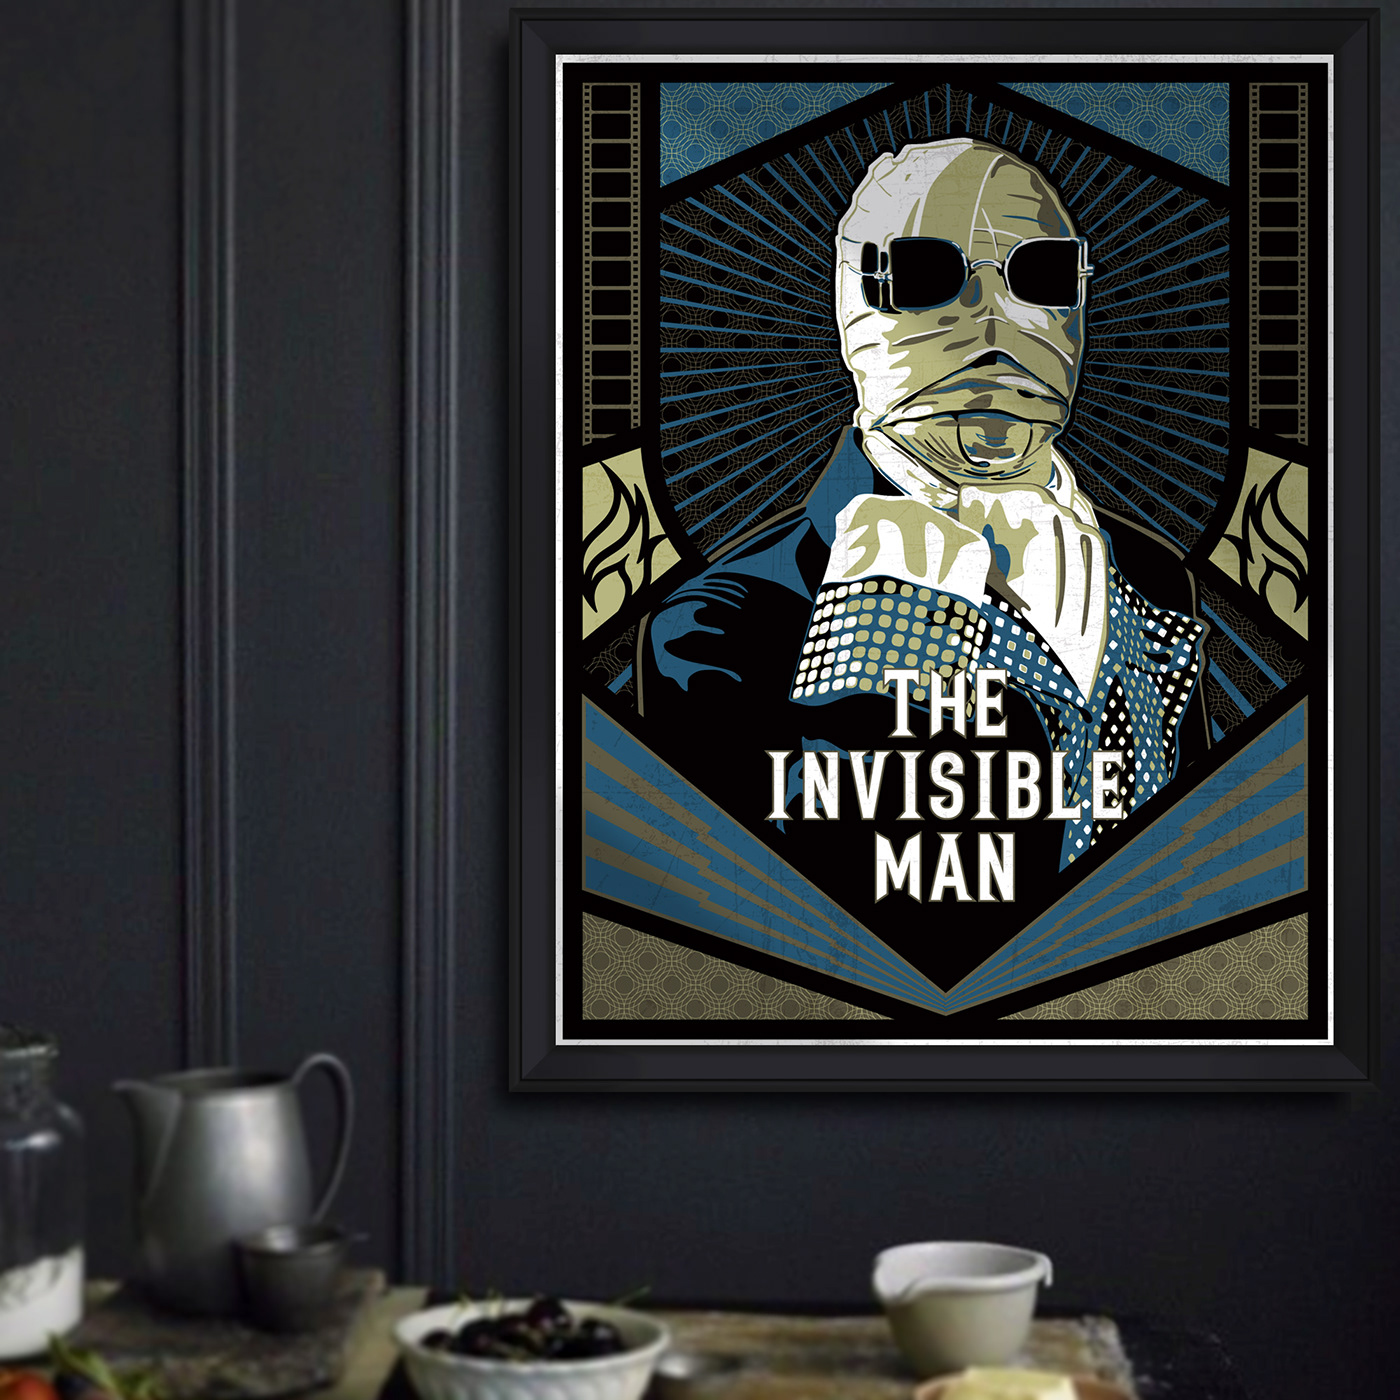 Universal Monsters classic cinema prints and posters available though my Etsy store.